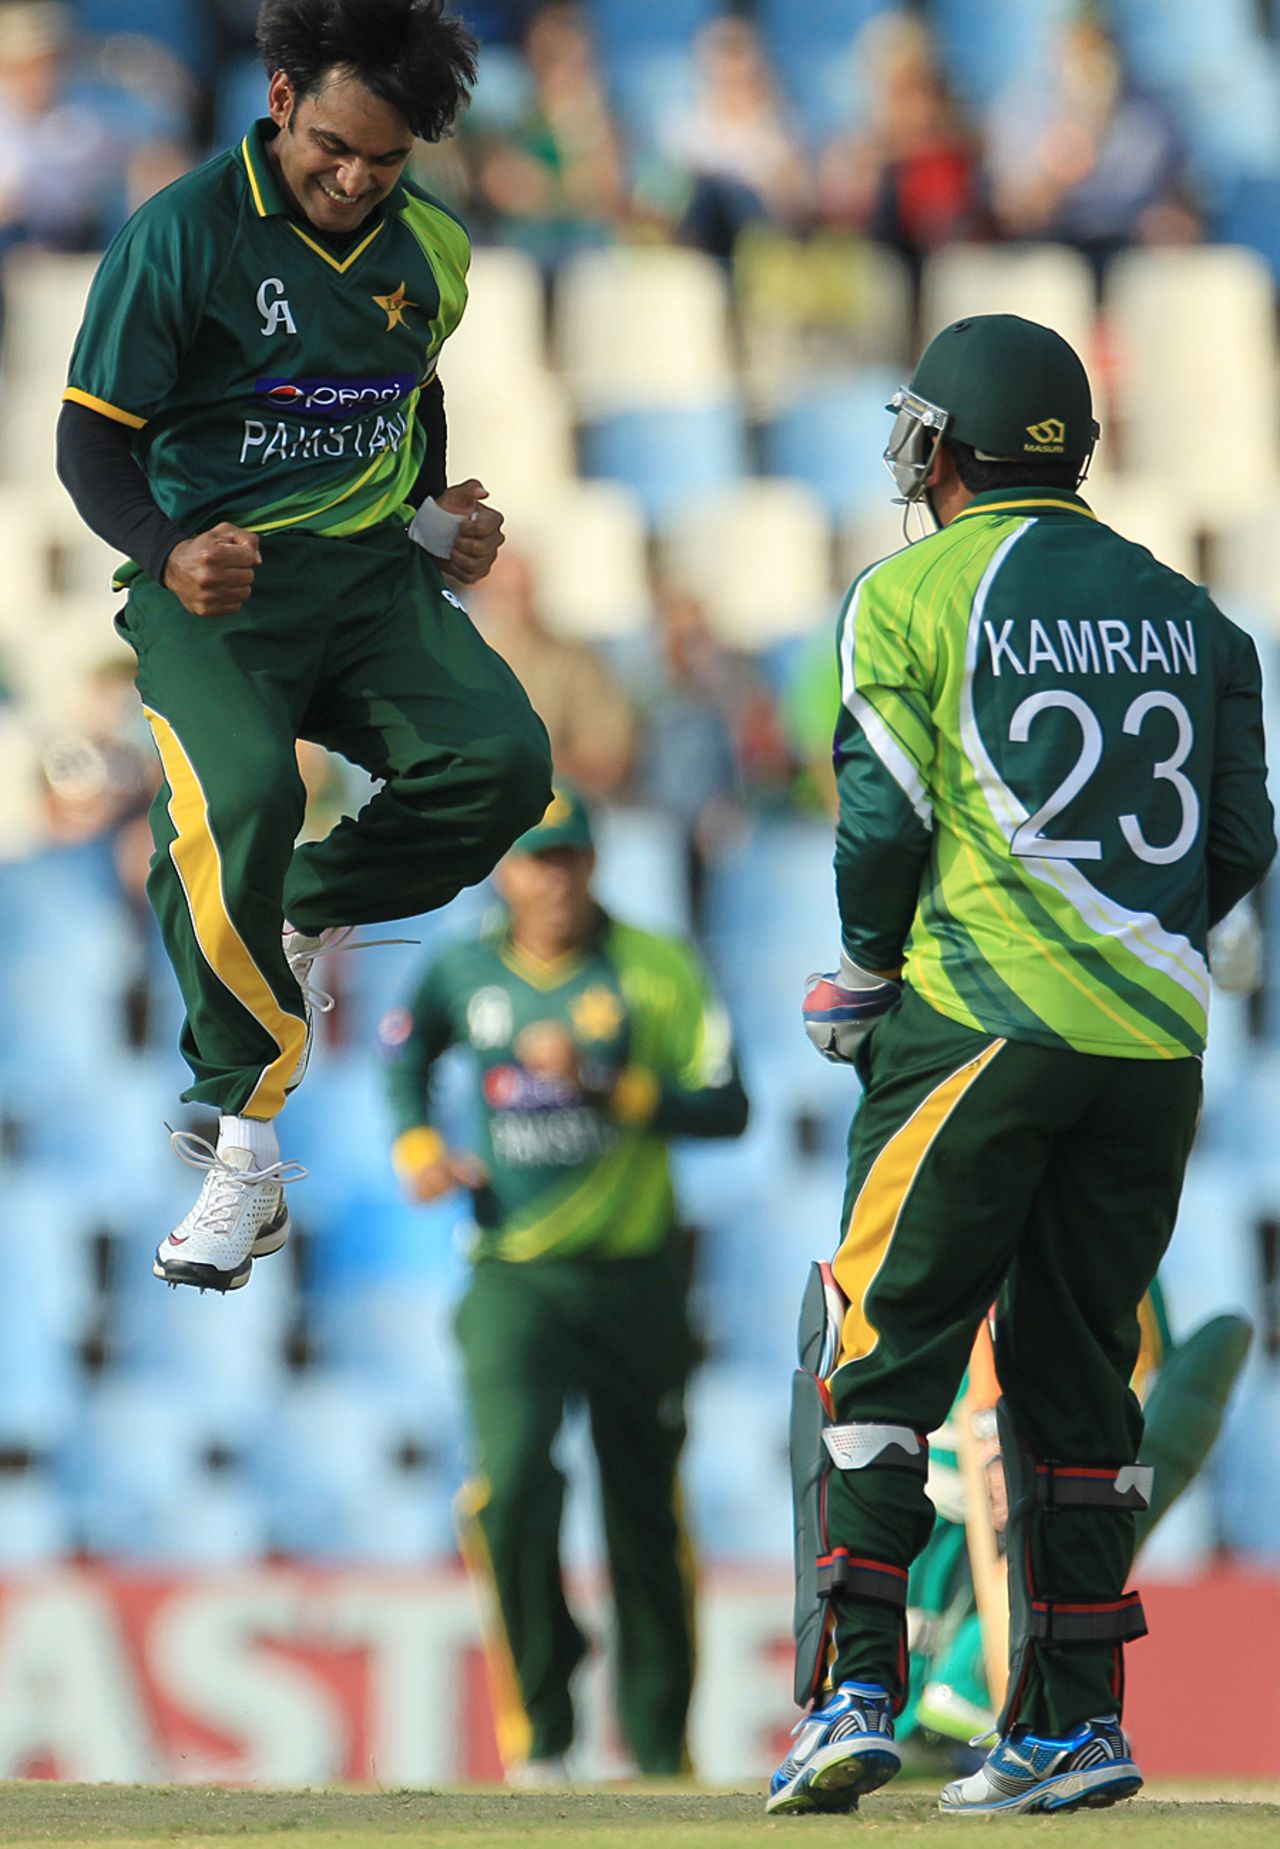 Mohammad Hafeez jumps after a wicket, South Africa v Pakistan, 2nd ODI, Centurion, March 15, 2013